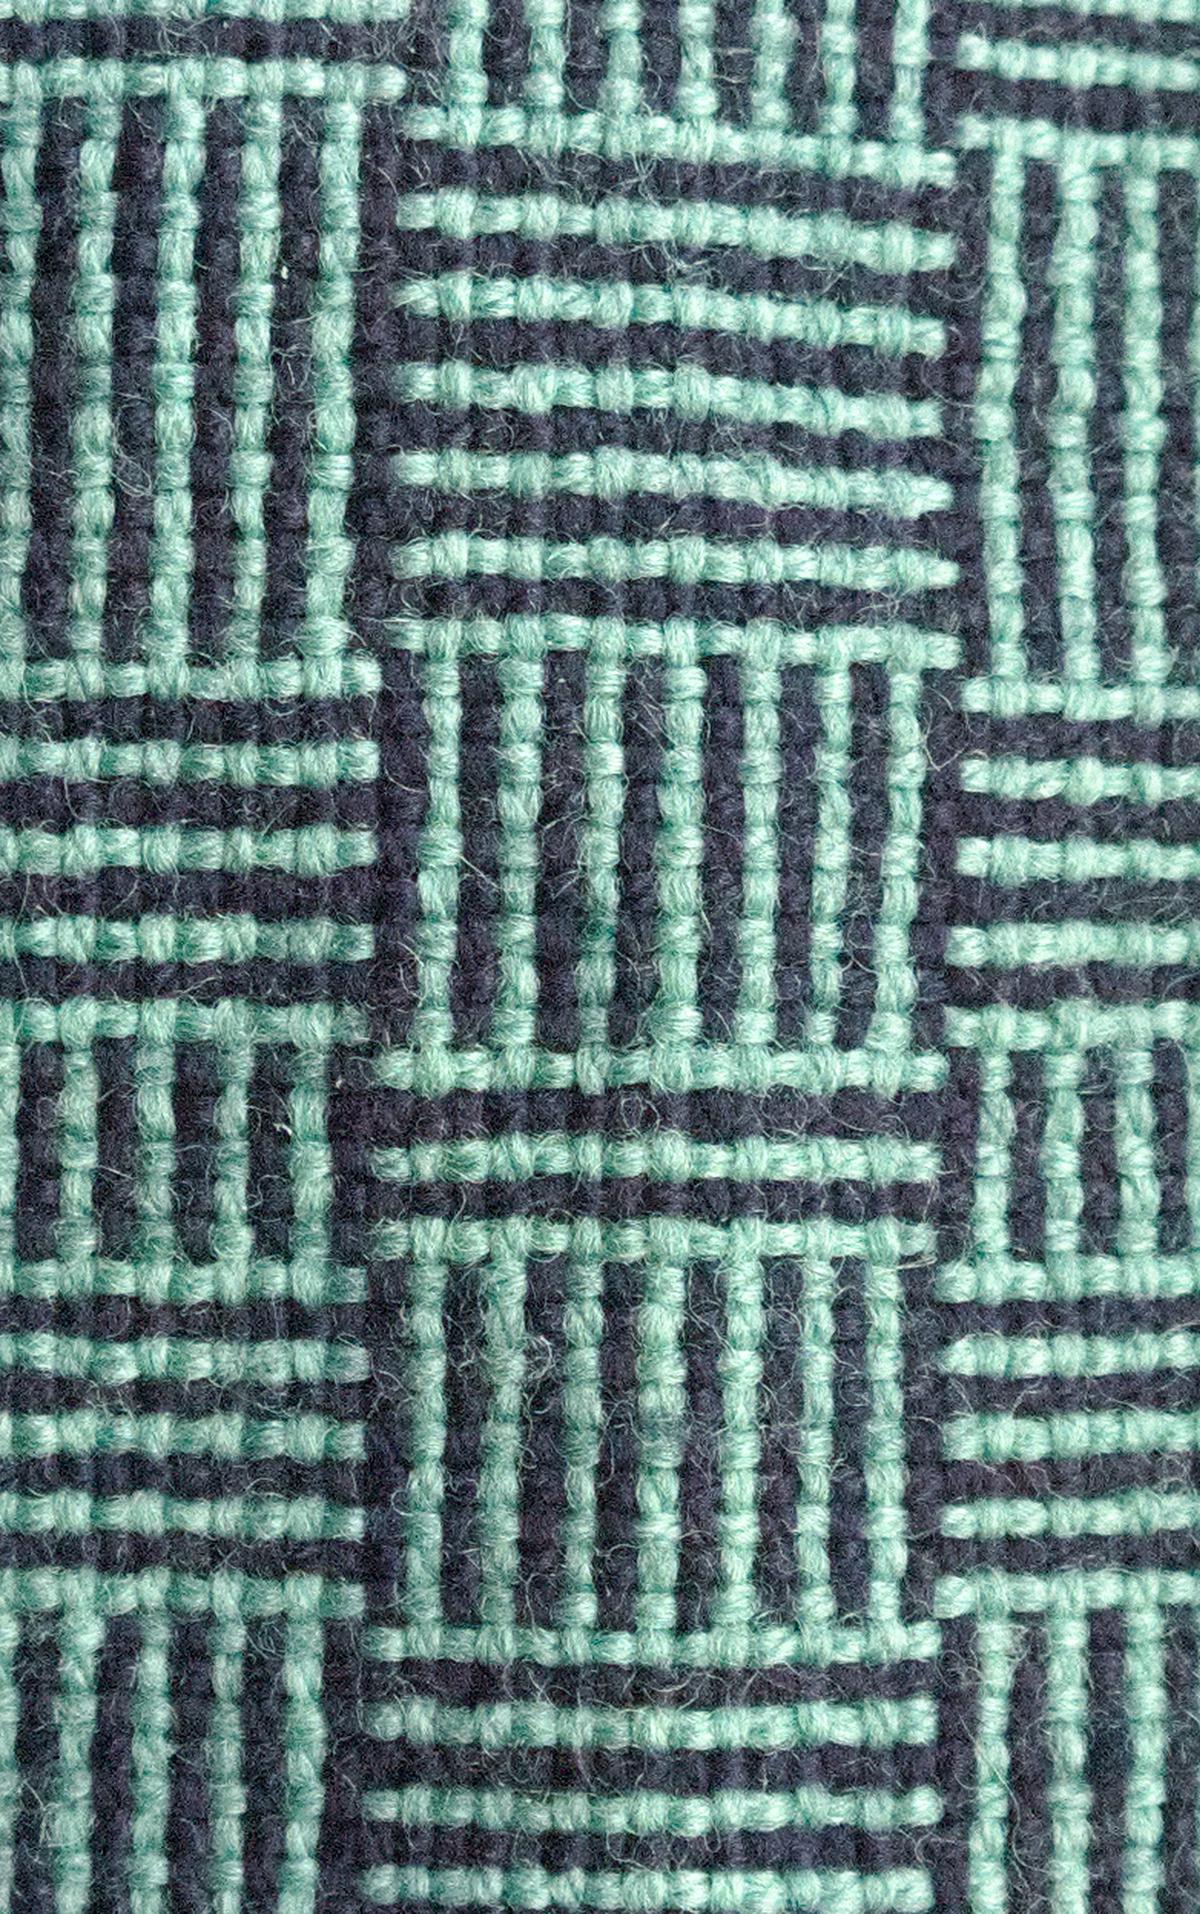 close-up of the texture: blocks alternating between horizontal and vertical stripes. the yarn is visibly coarse and wooly.